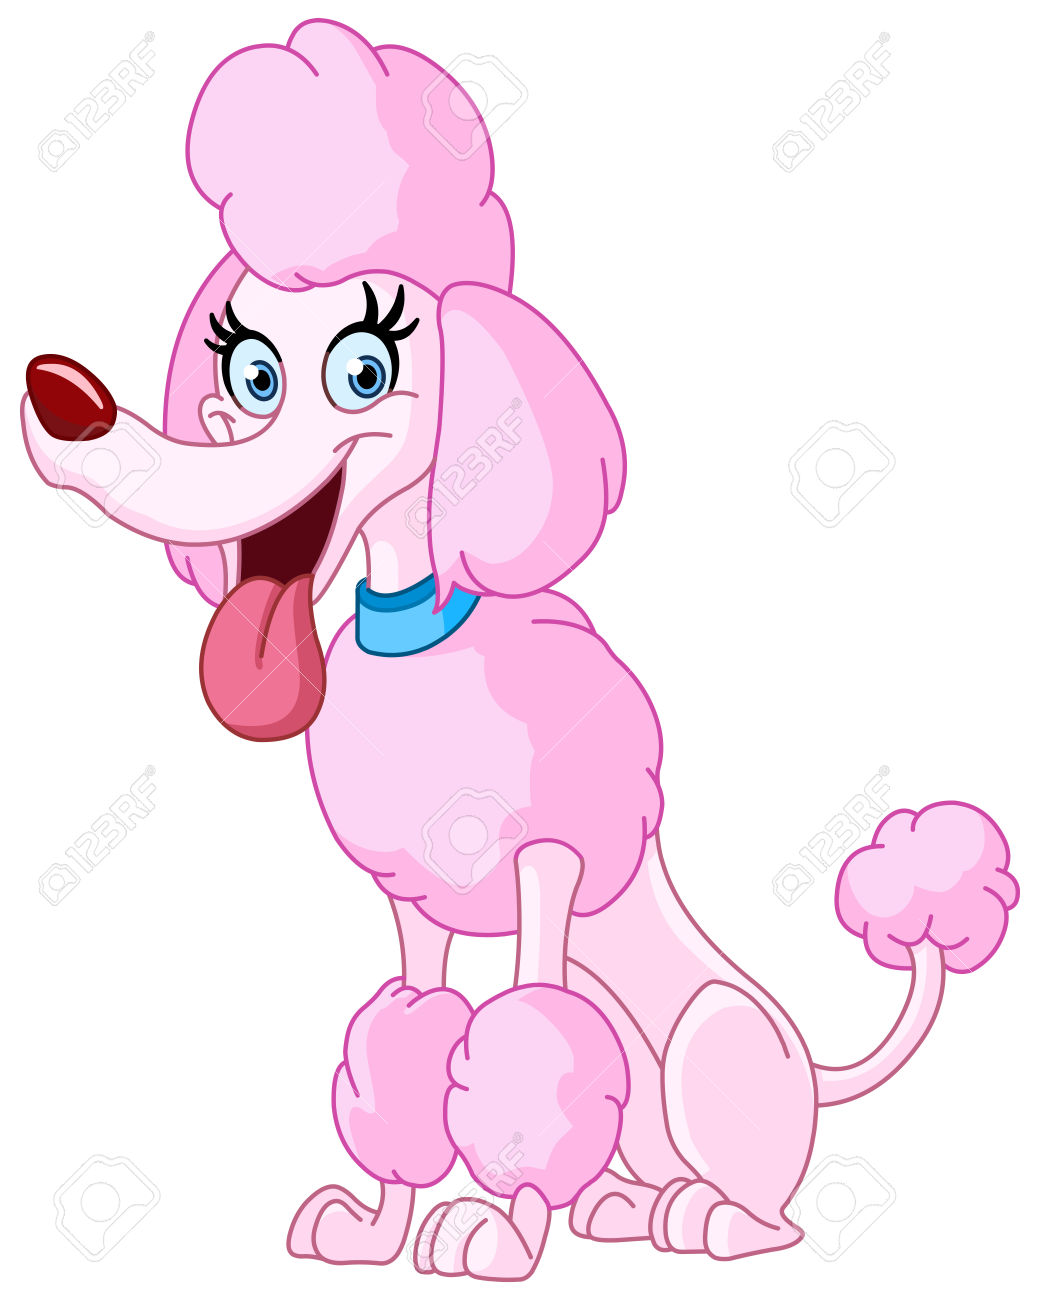 Standard Poodle clipart #14, Download drawings